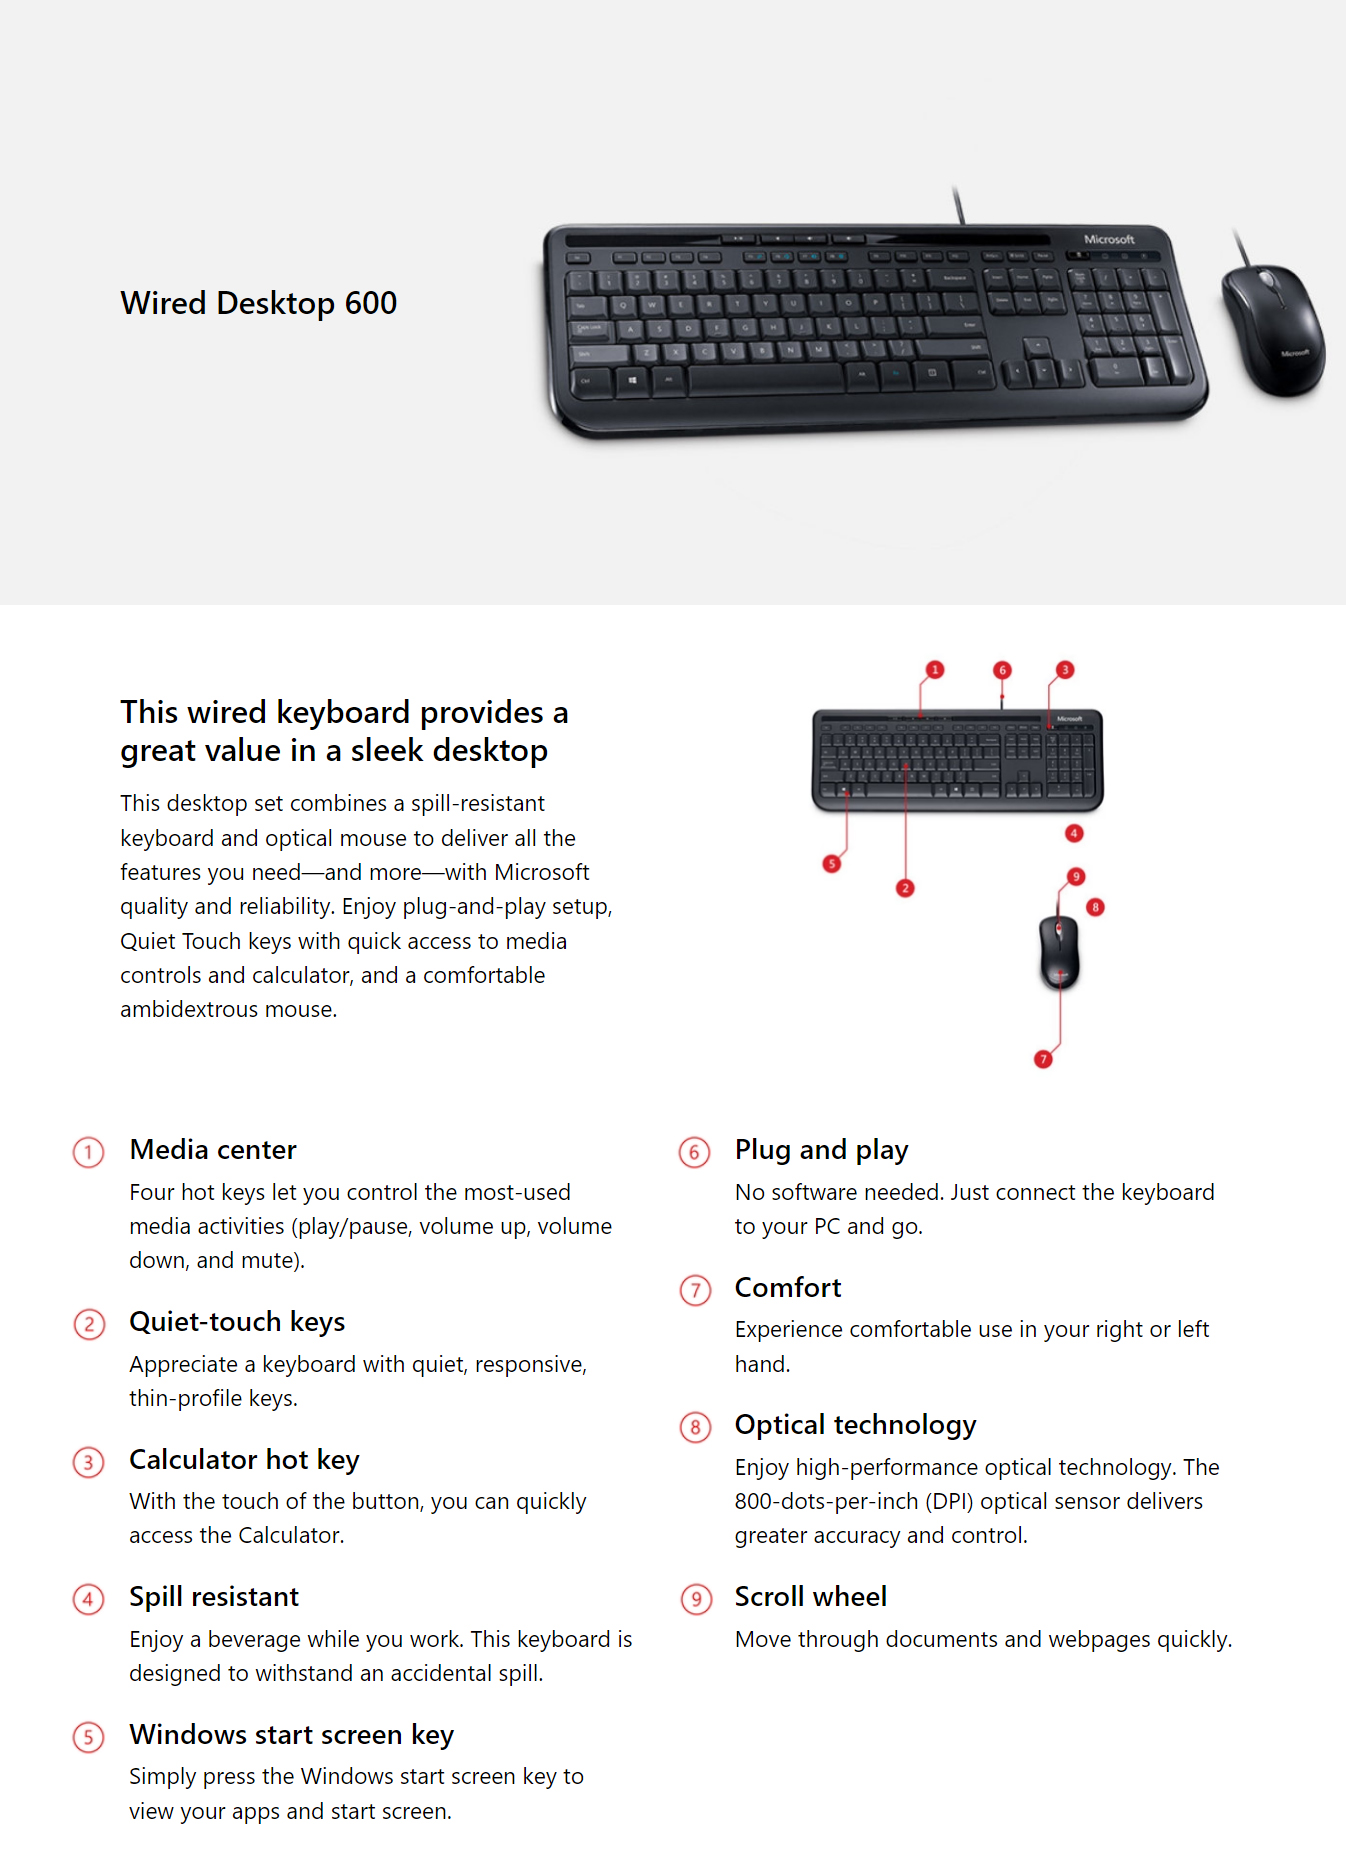 Keyboards-Microsoft-Wired-Desktop-600-USB-Keyboard-and-Mouse-Black-1